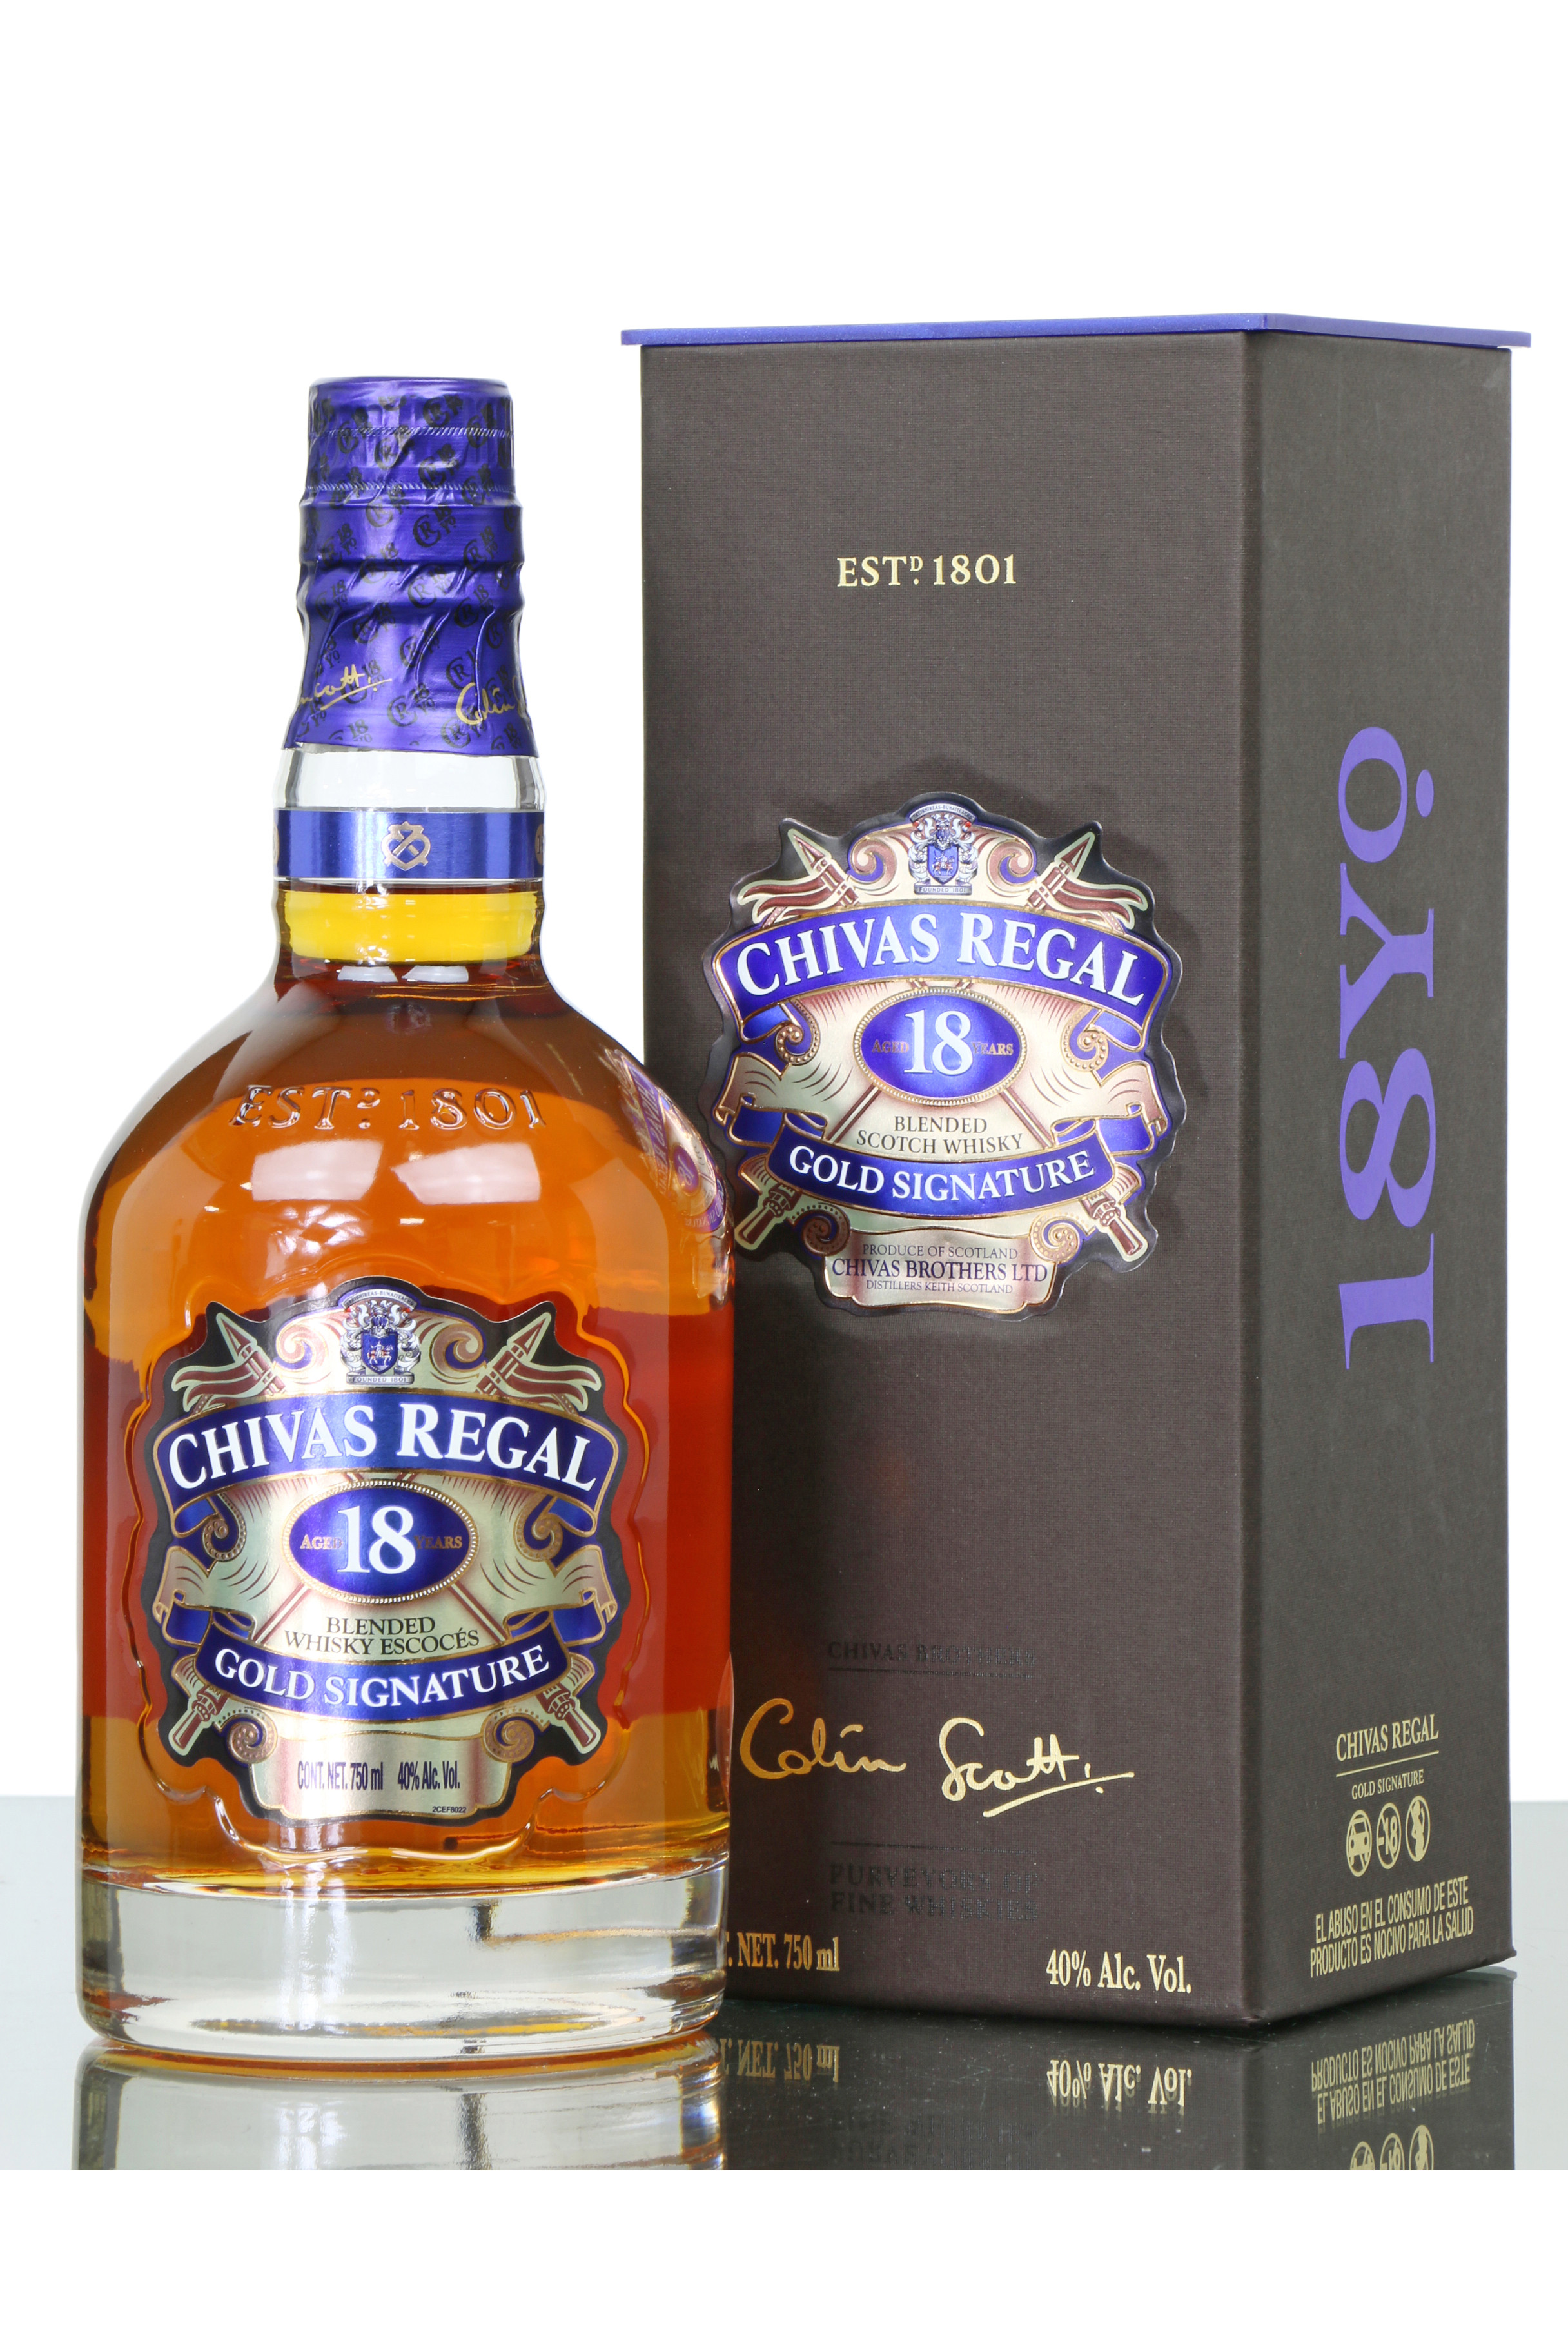 Chivas Regal Gold Signature 18-Year-Old Blended Scotch Whisky